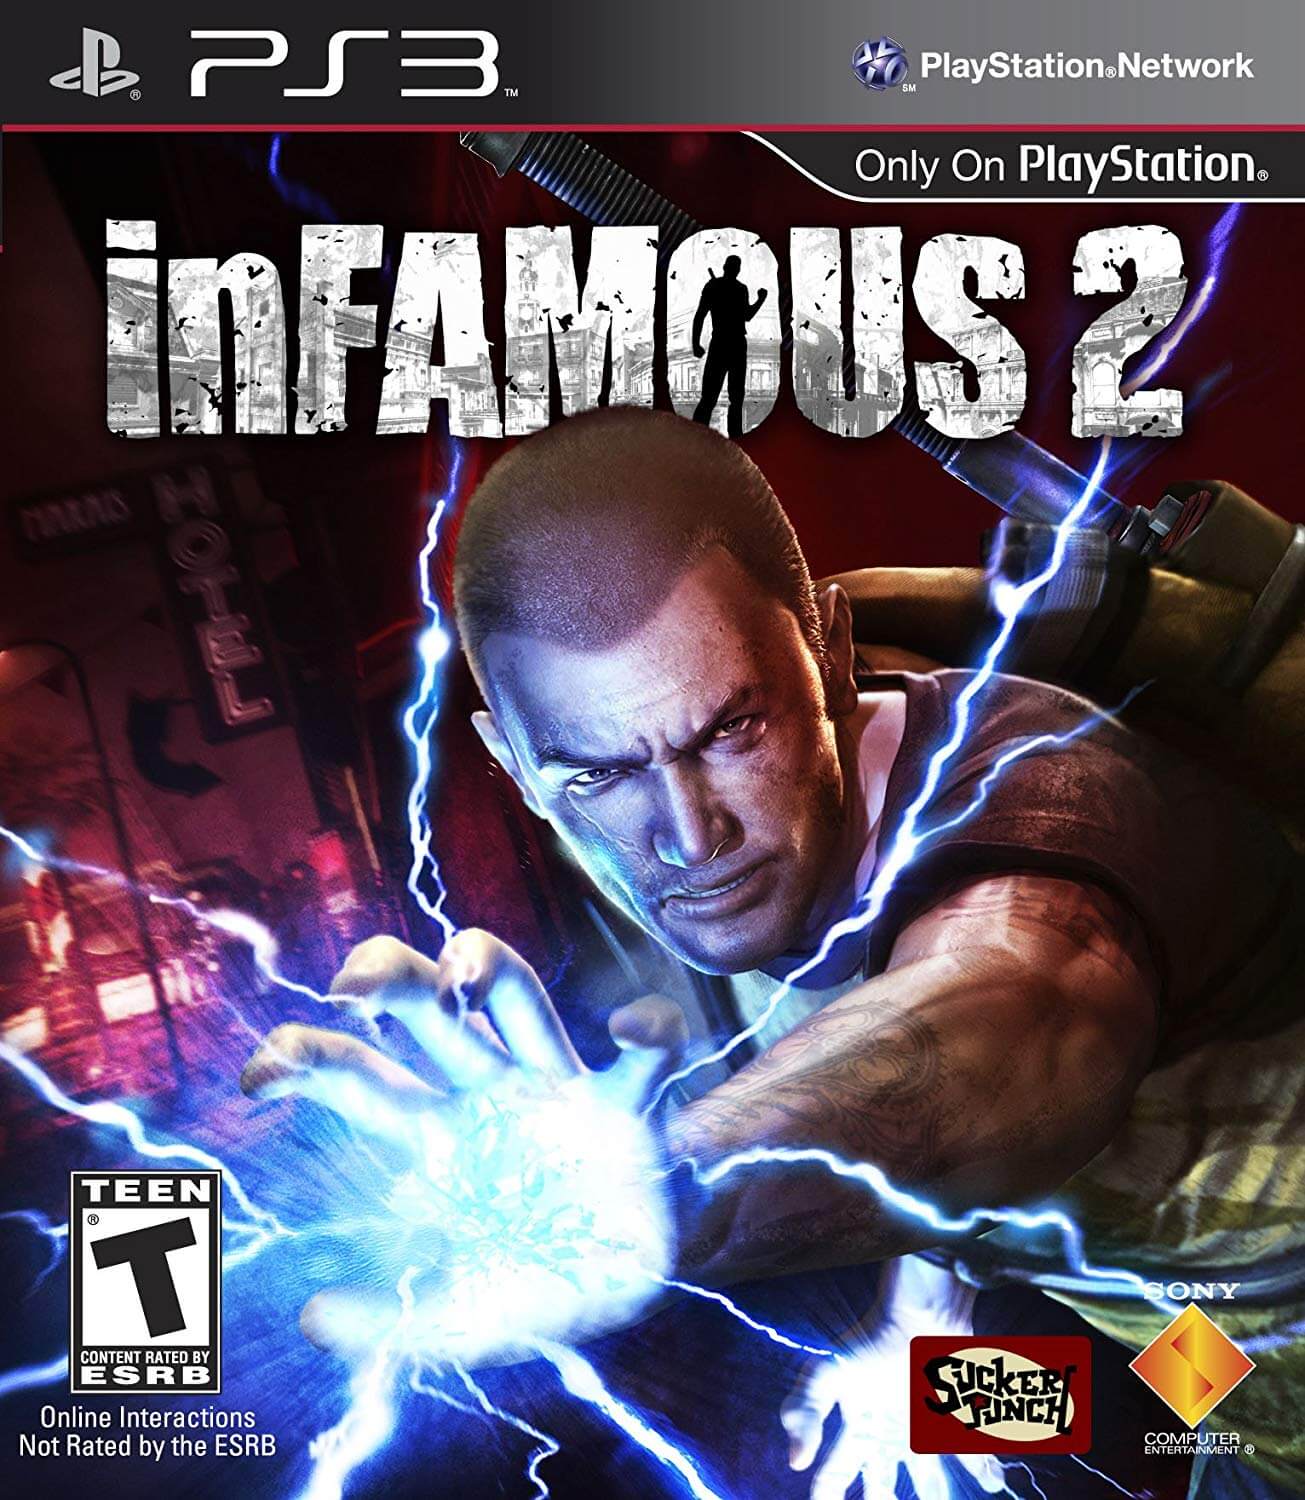 PS3 ROMs & ISO - Playstation 3 Decryption Game Download